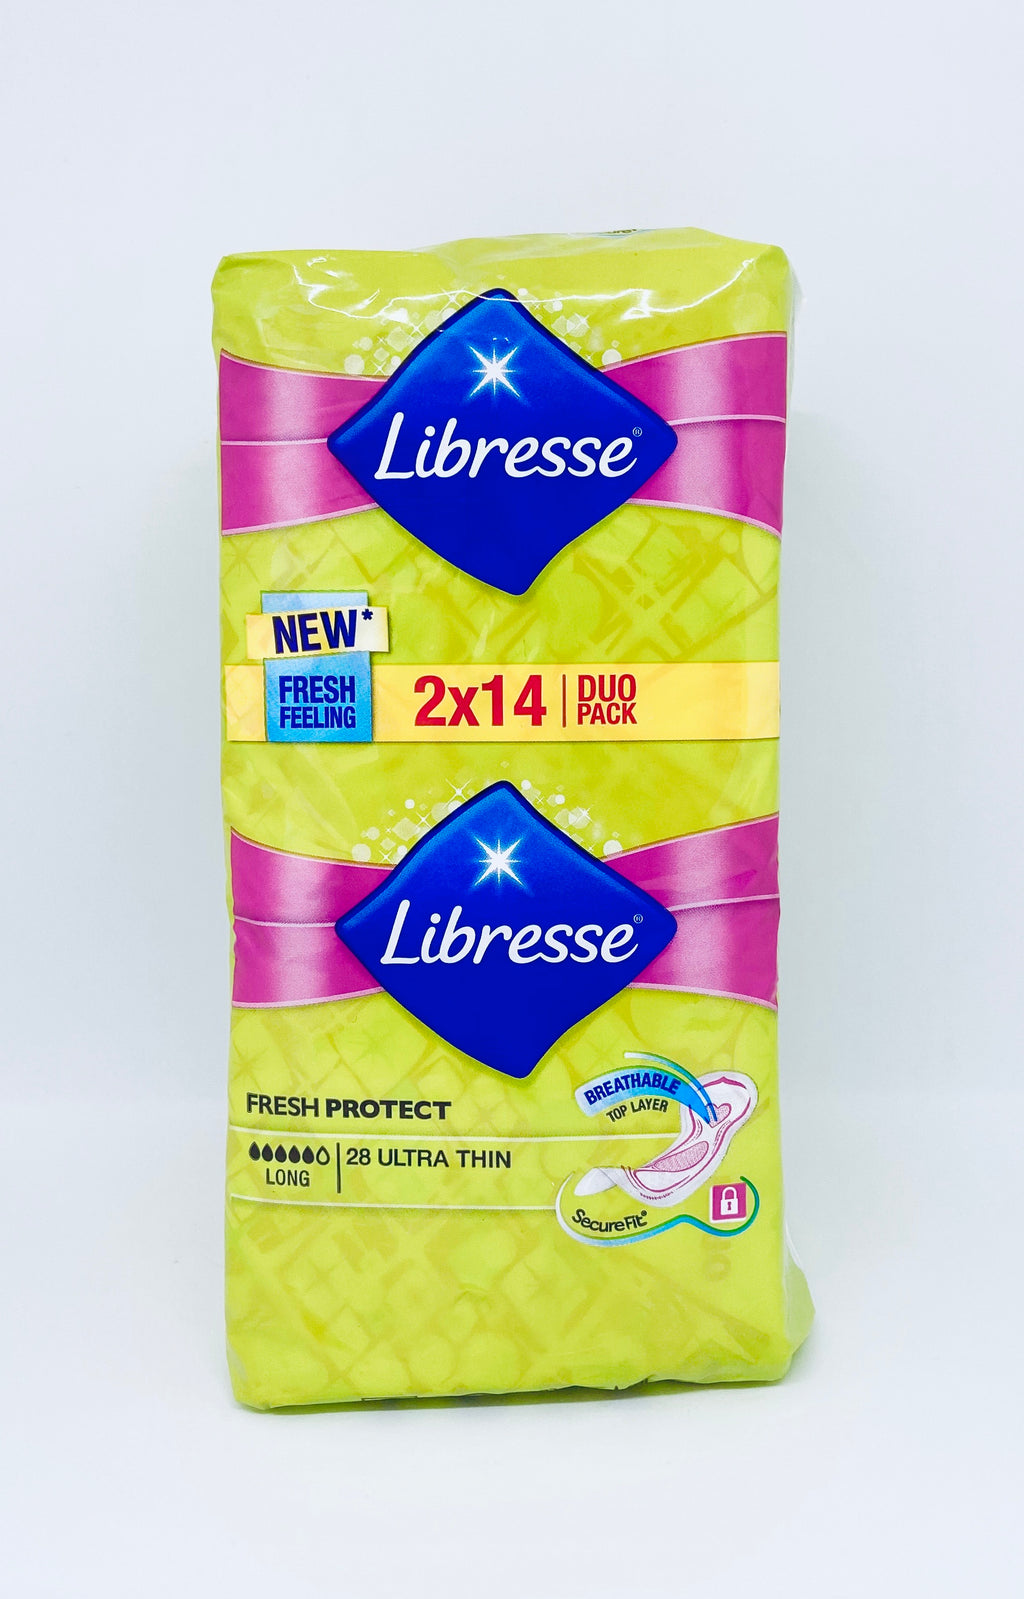 Libresse Ultra Thin - 28 Long wings Duo Pack